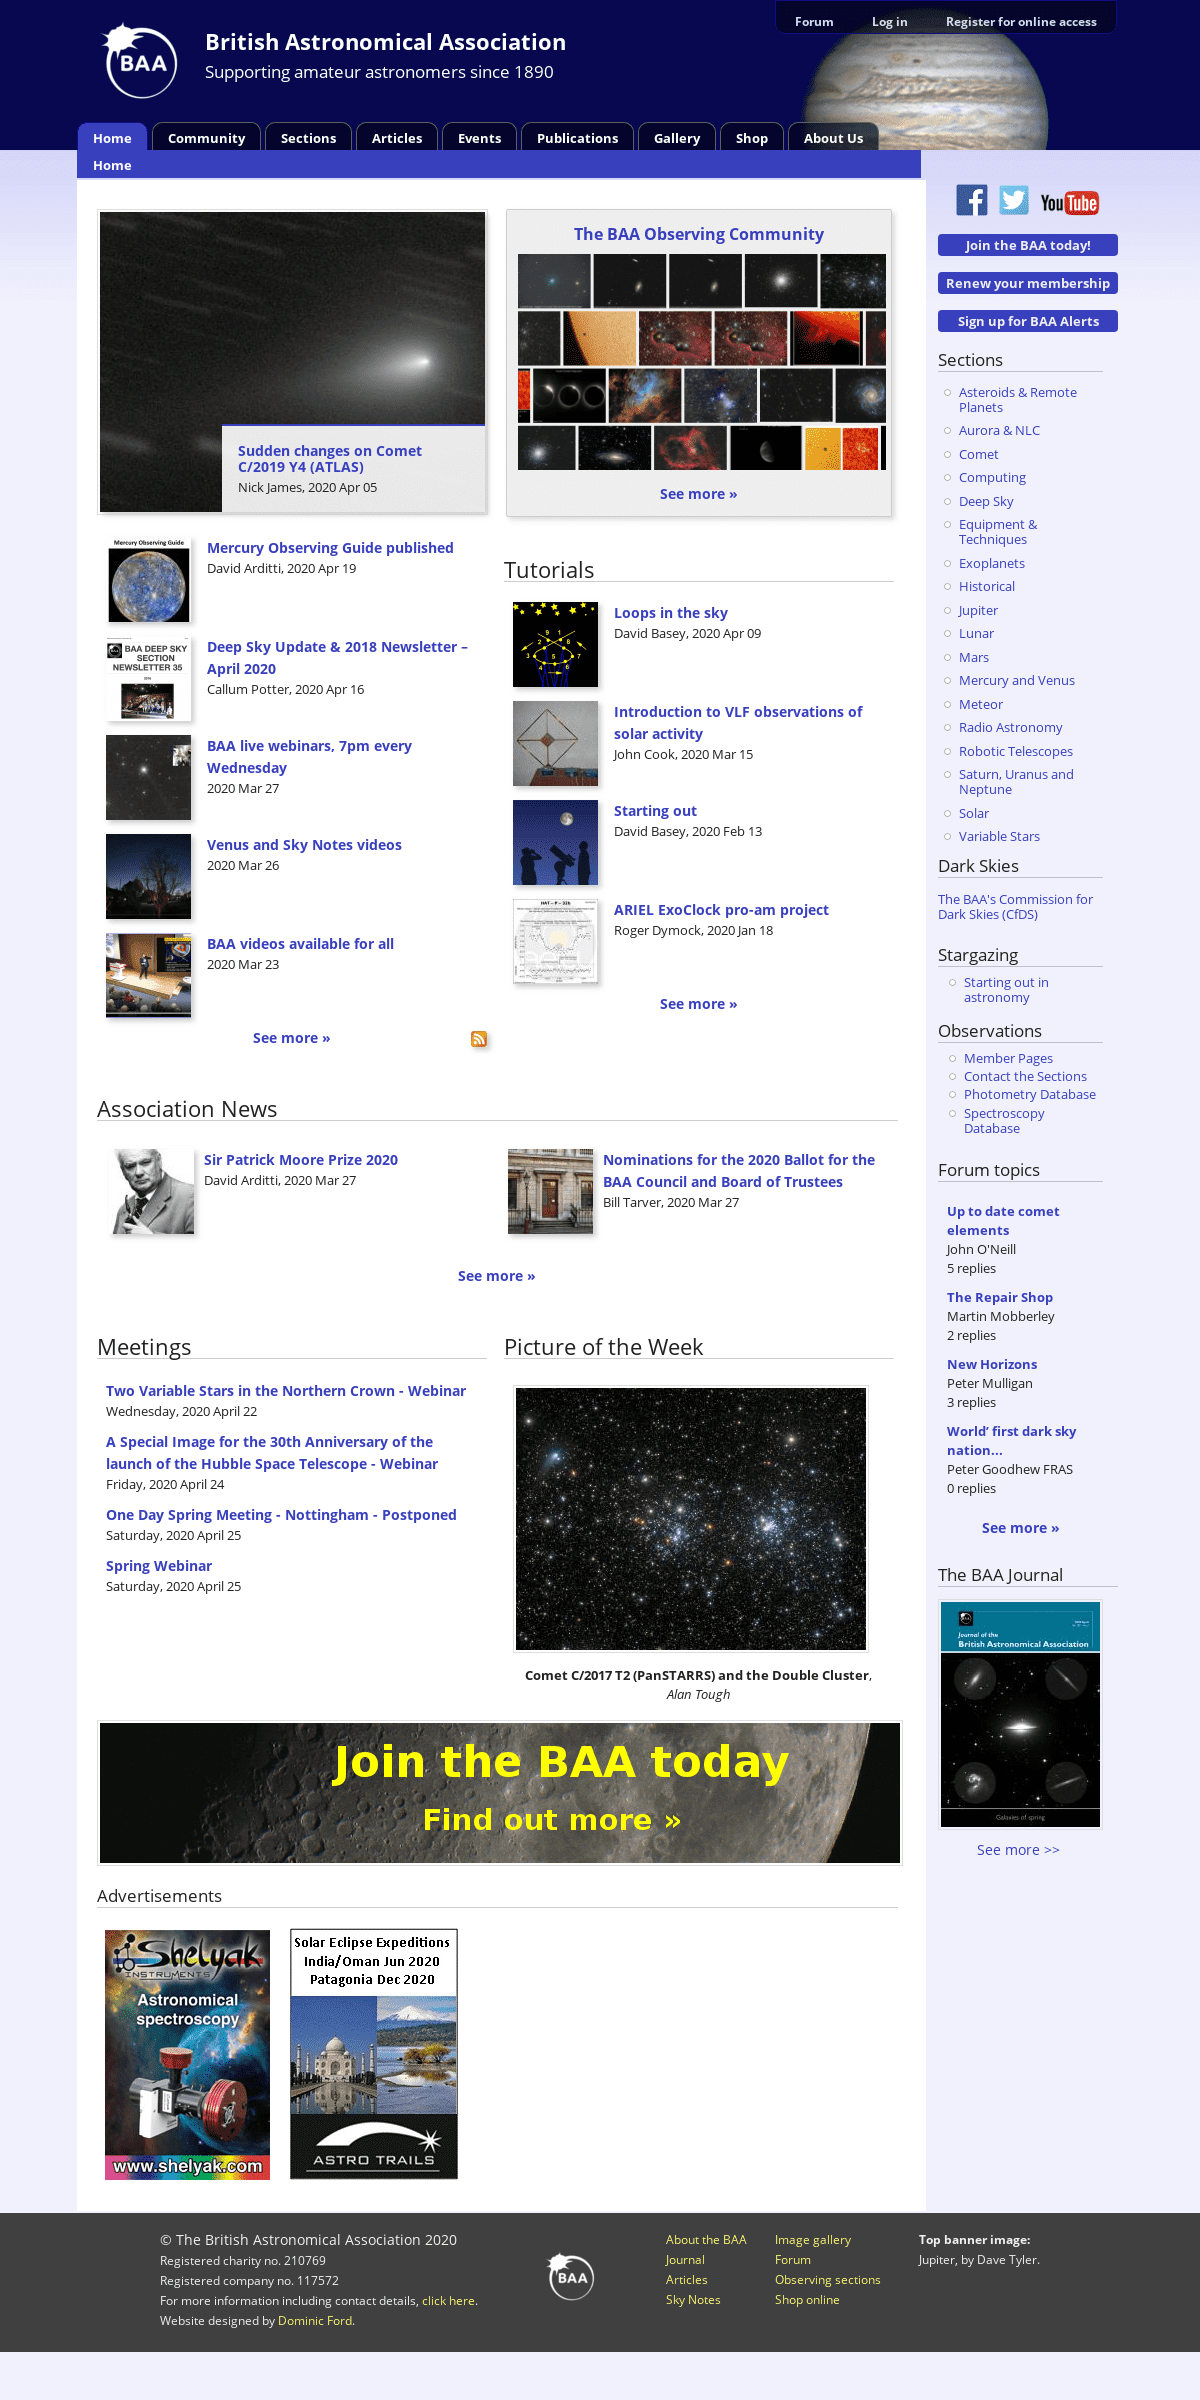 A complete backup of britastro.org